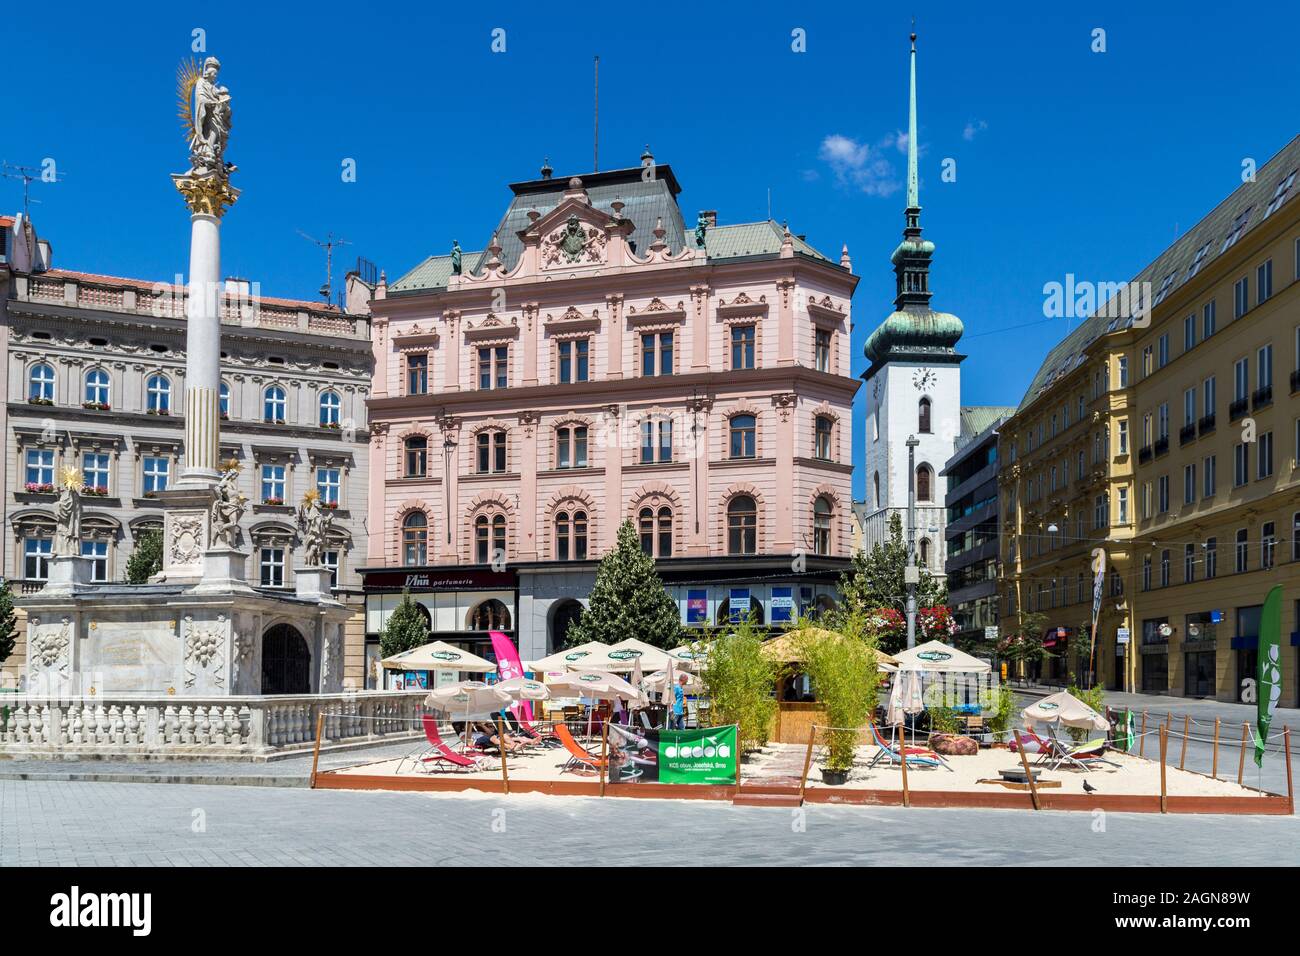 Plague monument and relaxing area of beach, Freedom Square, Brno, Czech Republic, Europe Stock Photo